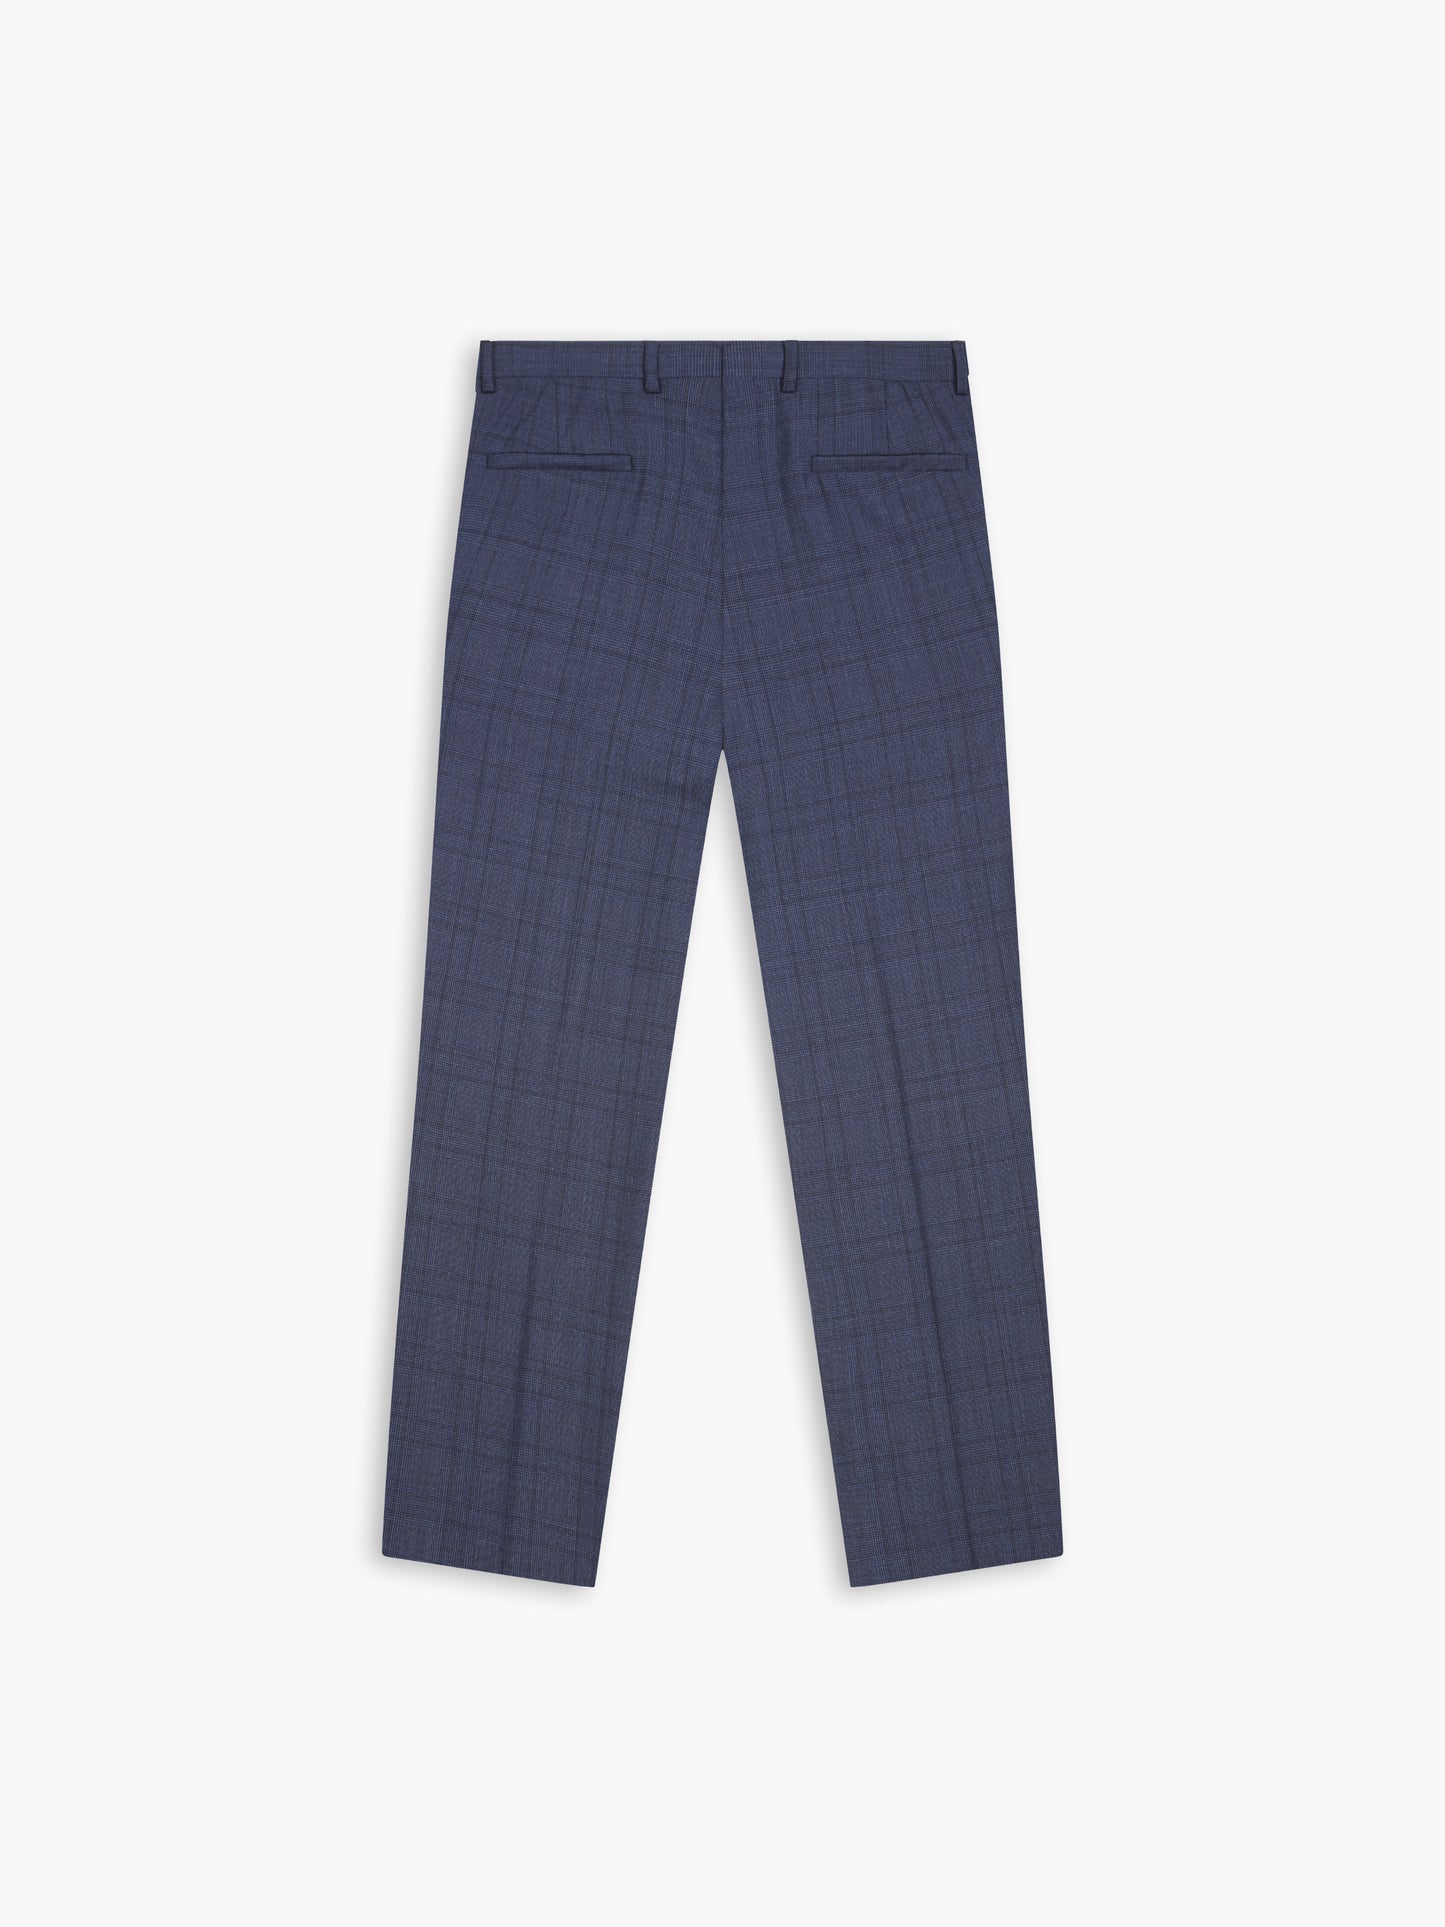 Kingaby Infinity Slim Fit Navy Blue Check Trousers